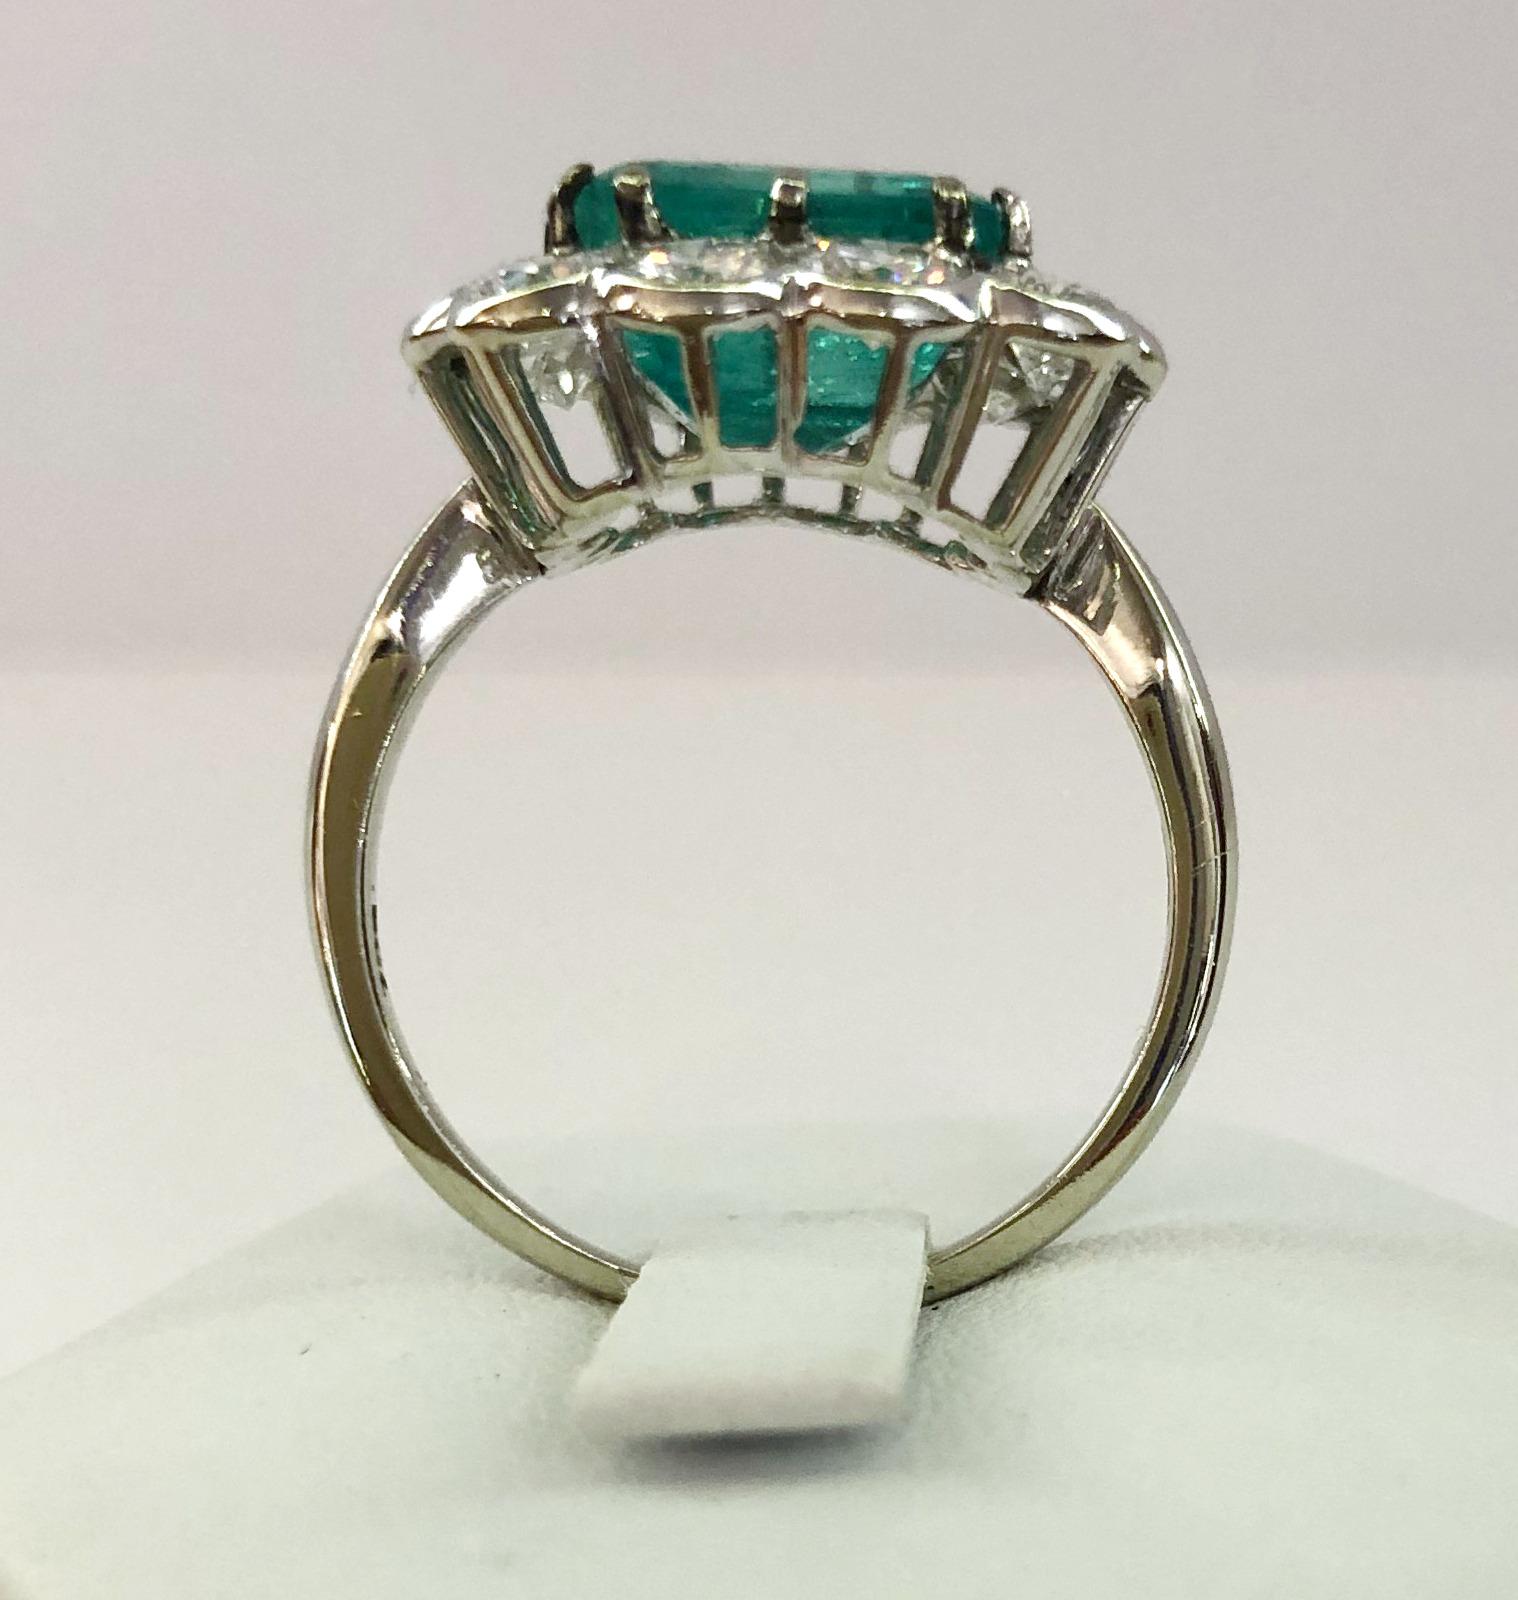 Vintage 18 karat white gold daisy ring with a central emerald of 3.5 karats and brilliant diamonds for a total of 1.5 karats, Italy 1960-1970s
Ring size US 8.5